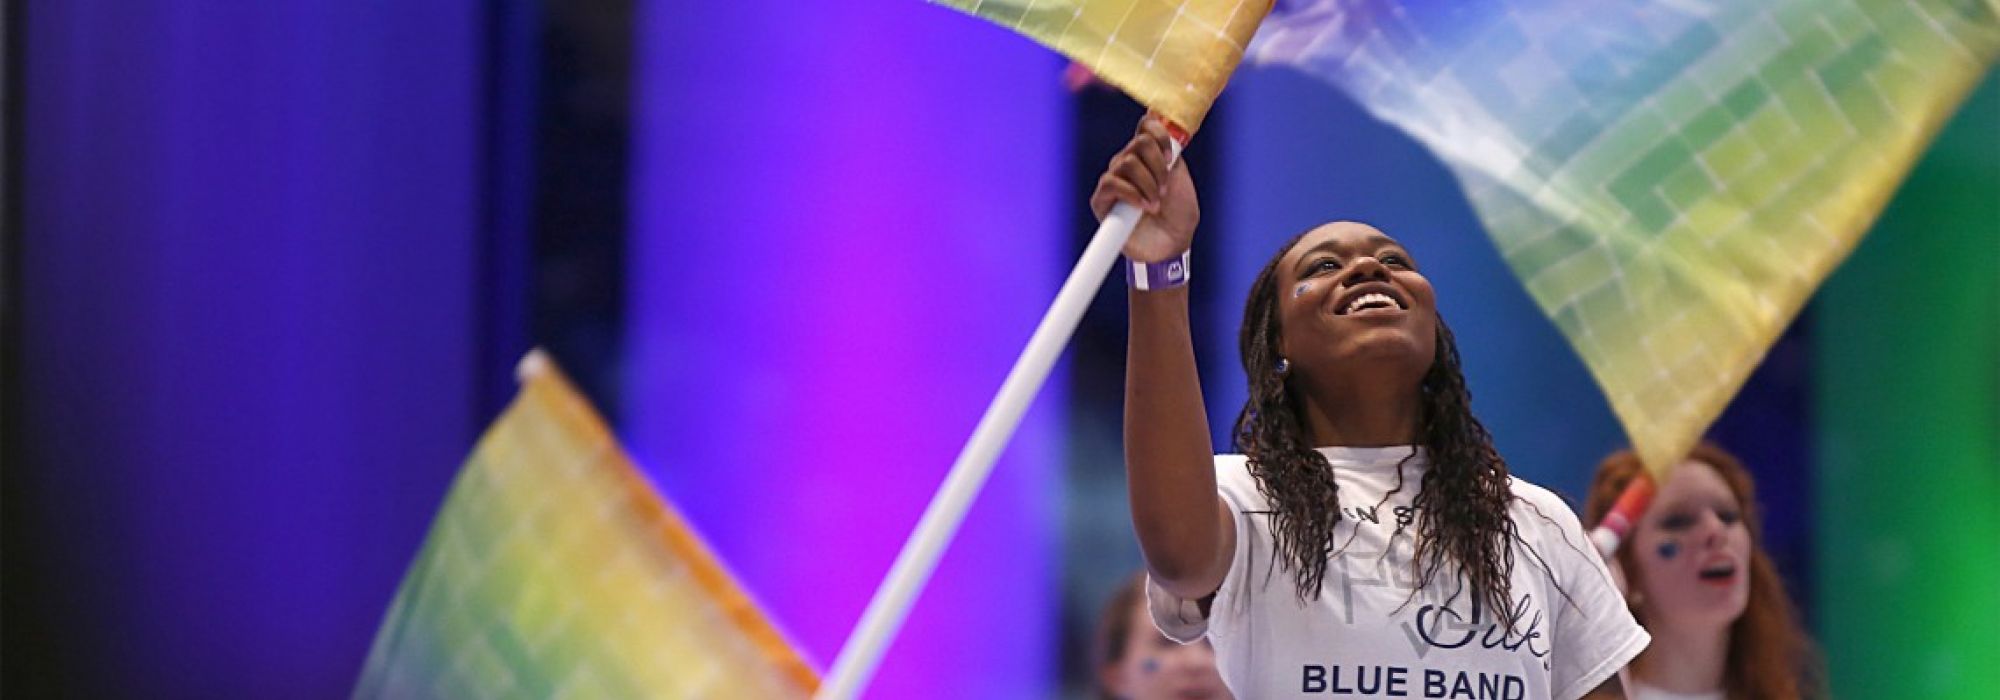 A young black student wearing a white t-shirt with a Blue Band Silks logo spins a rainbow-colored flag in the air.